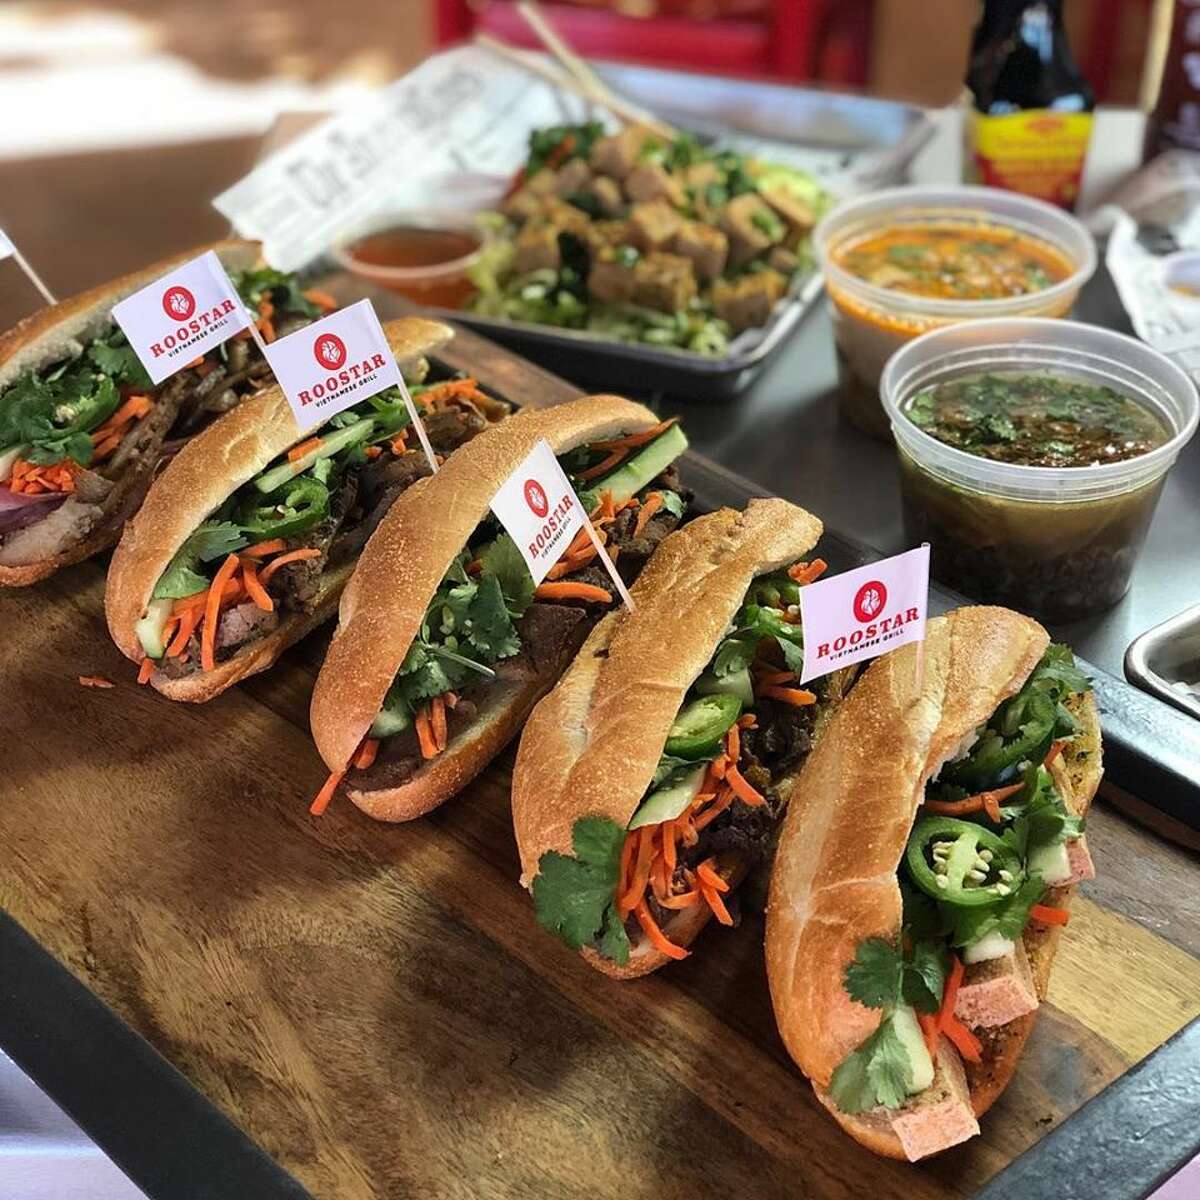 Known for its popular banh mi, Roostar Vietnamese Grill is set to open a third location coming soon to East End Houston.